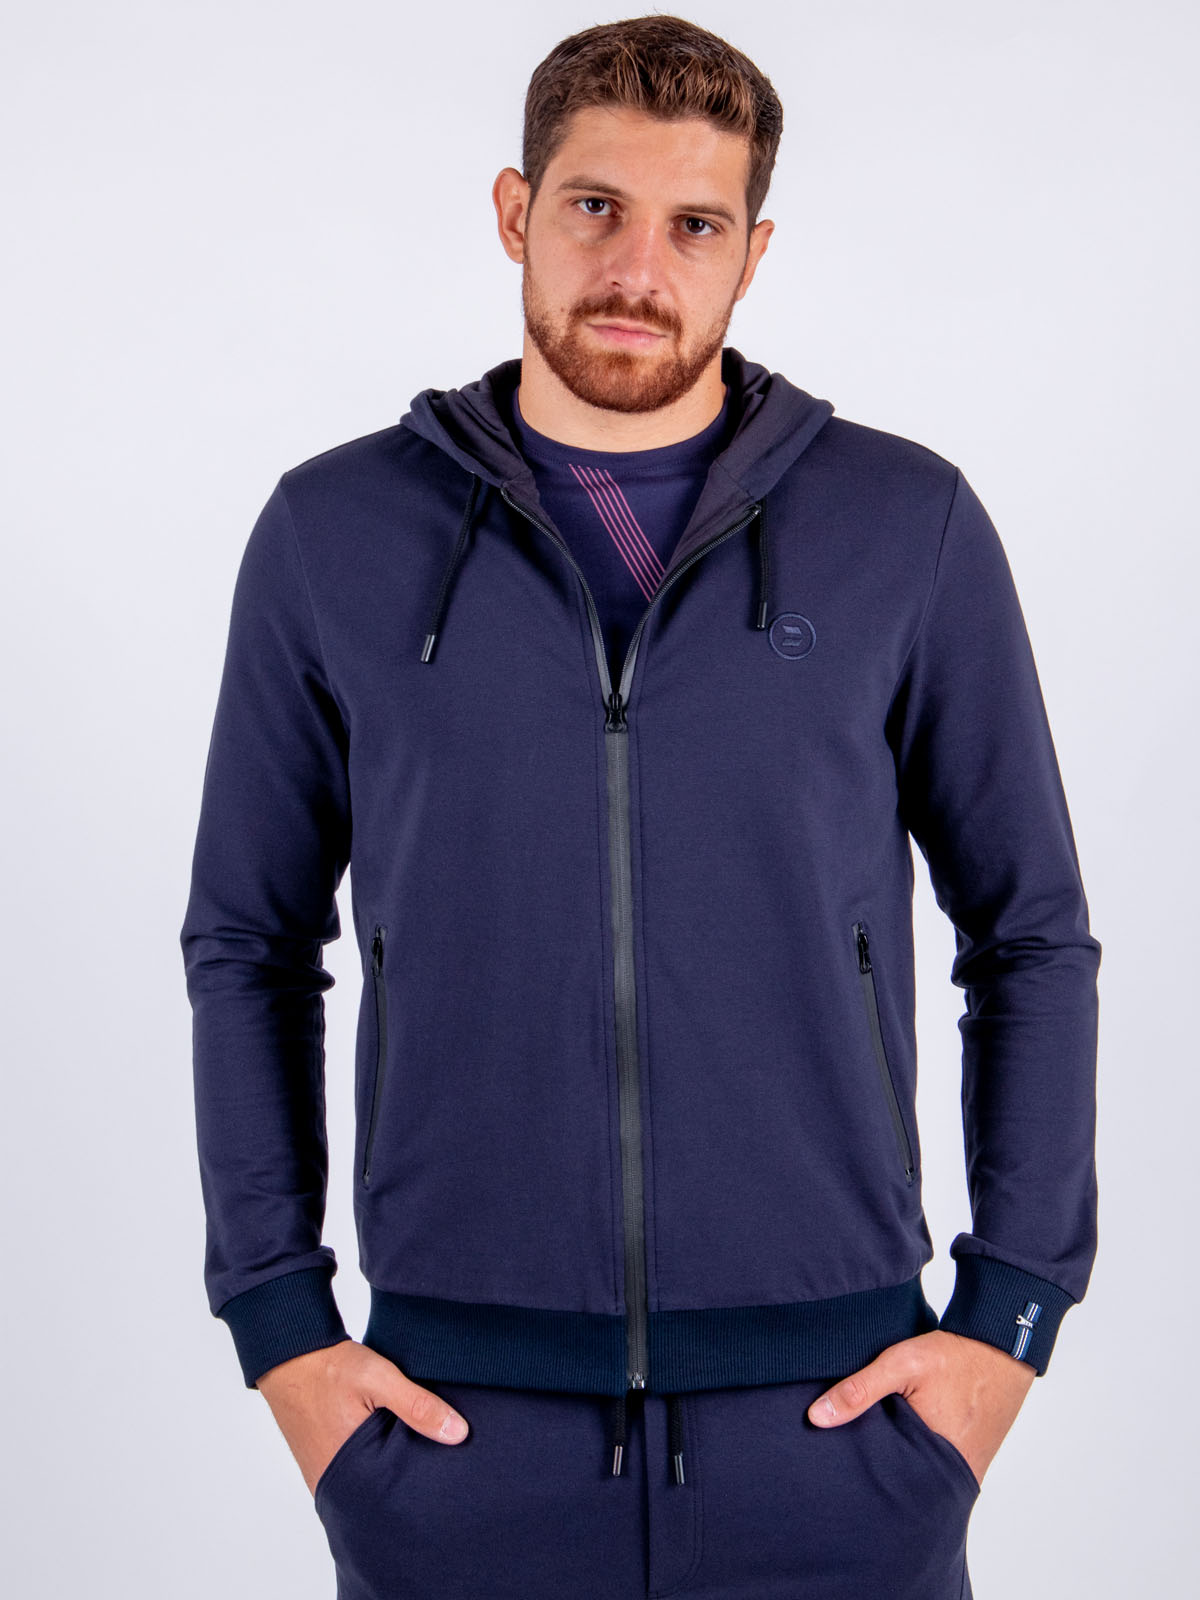 Sports sweatshirt in blue with a hood - 28094 € 27.56 img2